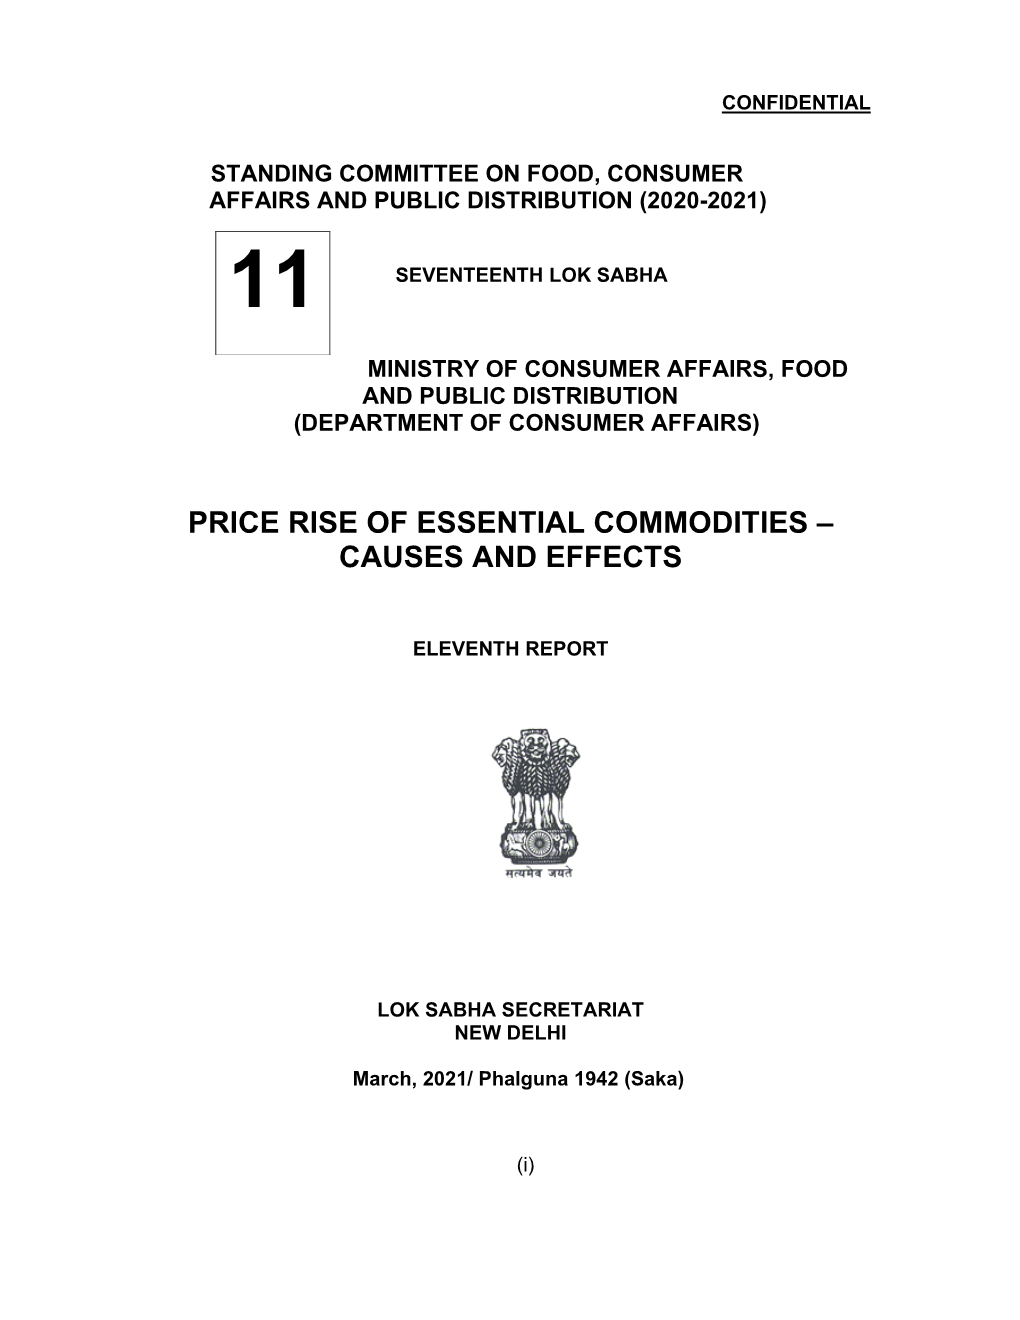 Price Rise of Essential Commodities – Causes and Effects